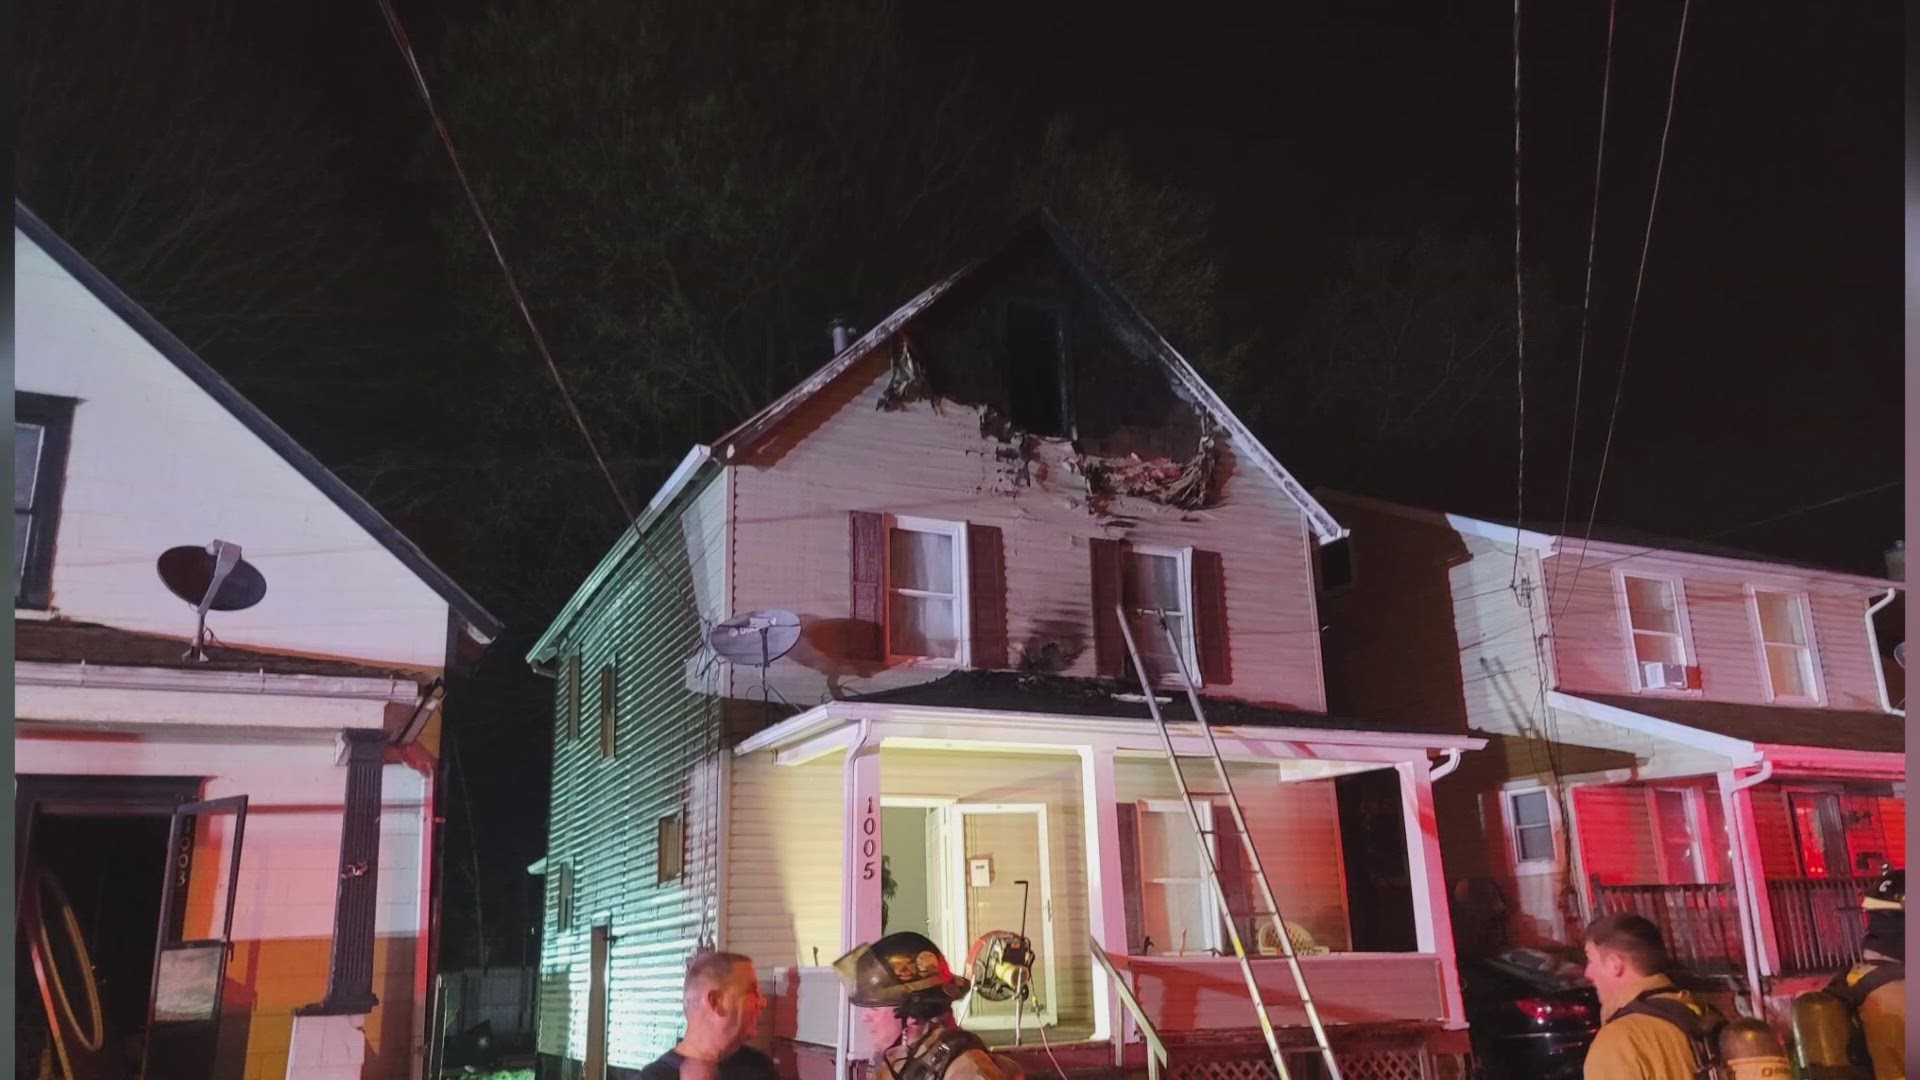 The Canton Fire Department says that while firefighters were able to quickly extinguish the flames, there was heavy damage to the home.